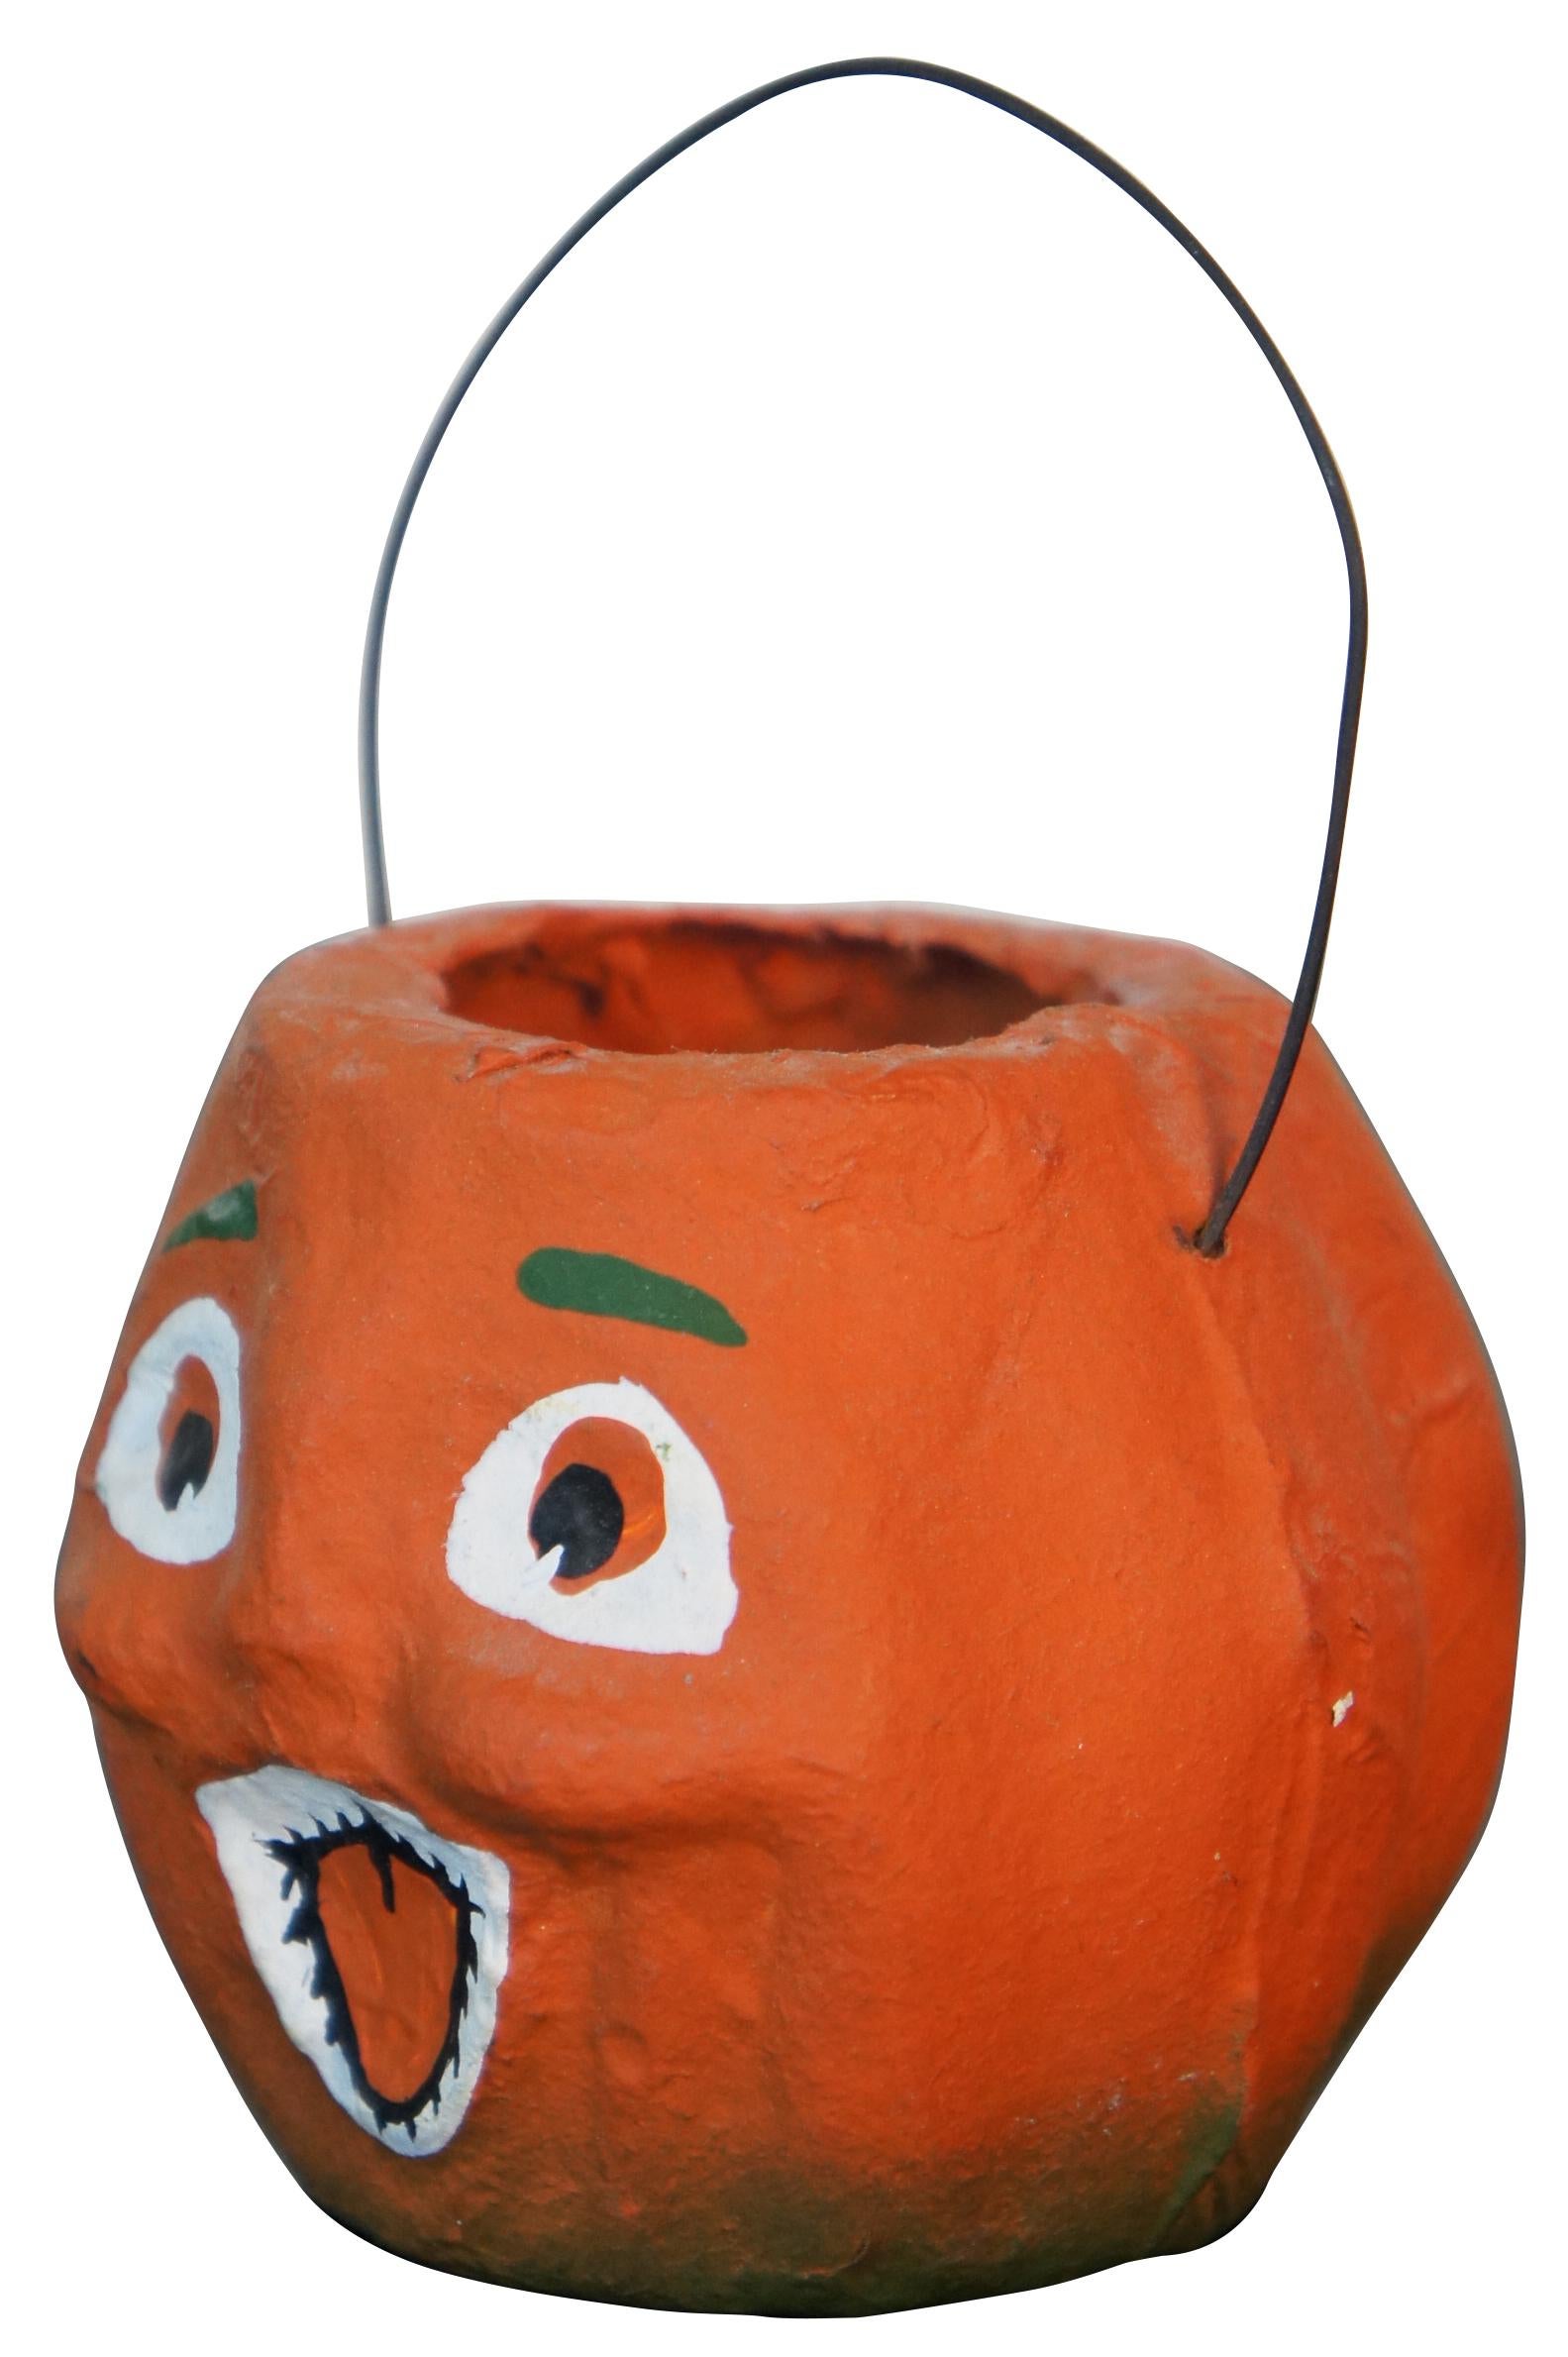 Antique paper mache miniature jack-o-lantern shaped candy bucket with painted face and wire handle.
      